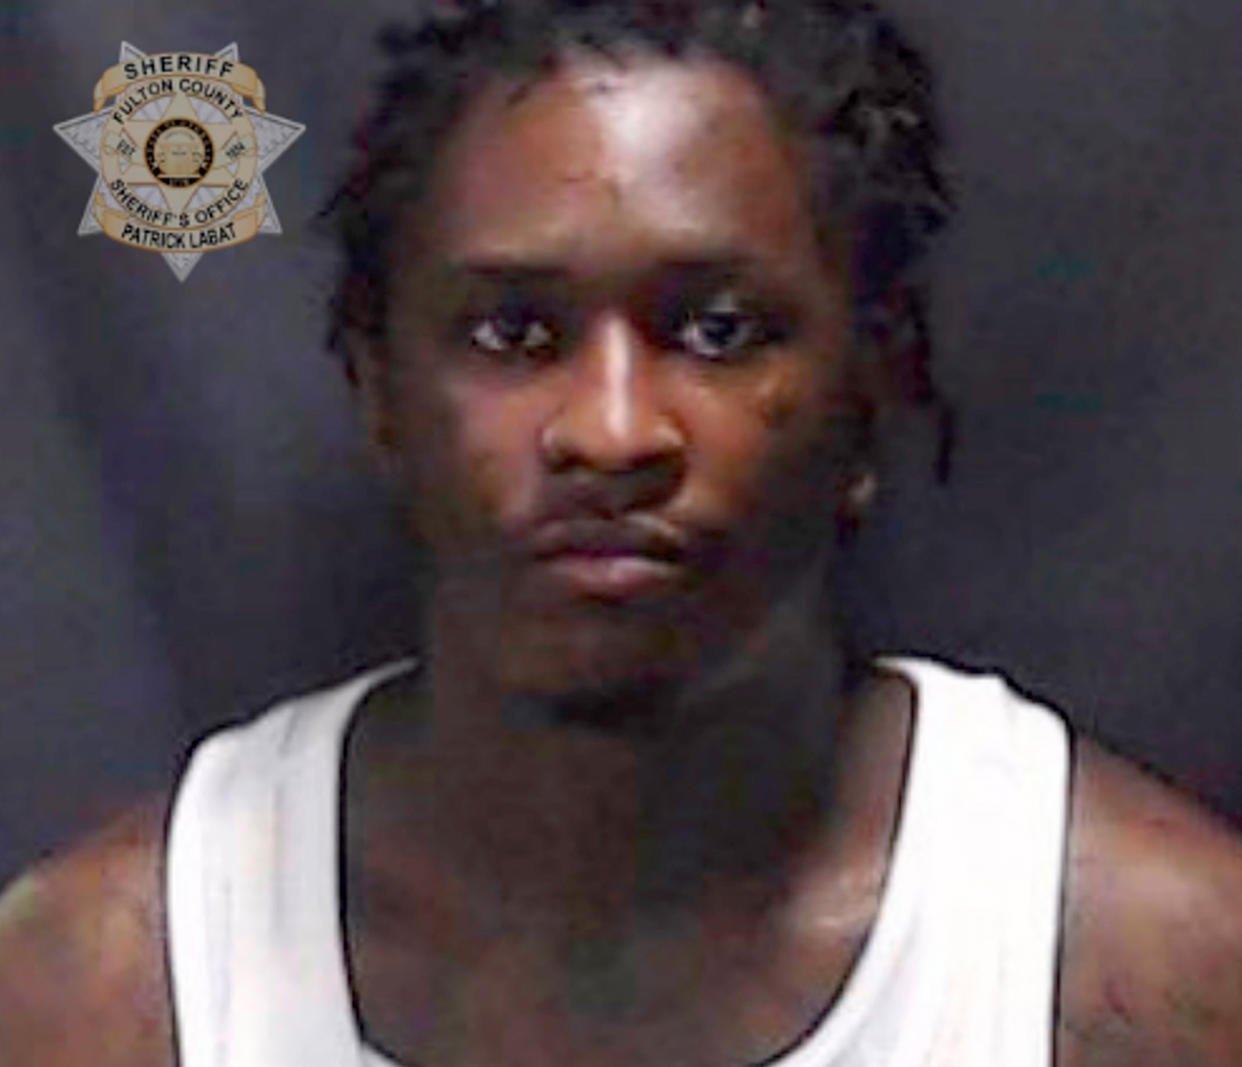 Booking photo of Young Thug, who was one of 28 people indicted in May on conspiracy to violate the state’s RICO act and street gang charges. - Credit: Fulton County Sheriff’s Office via AP